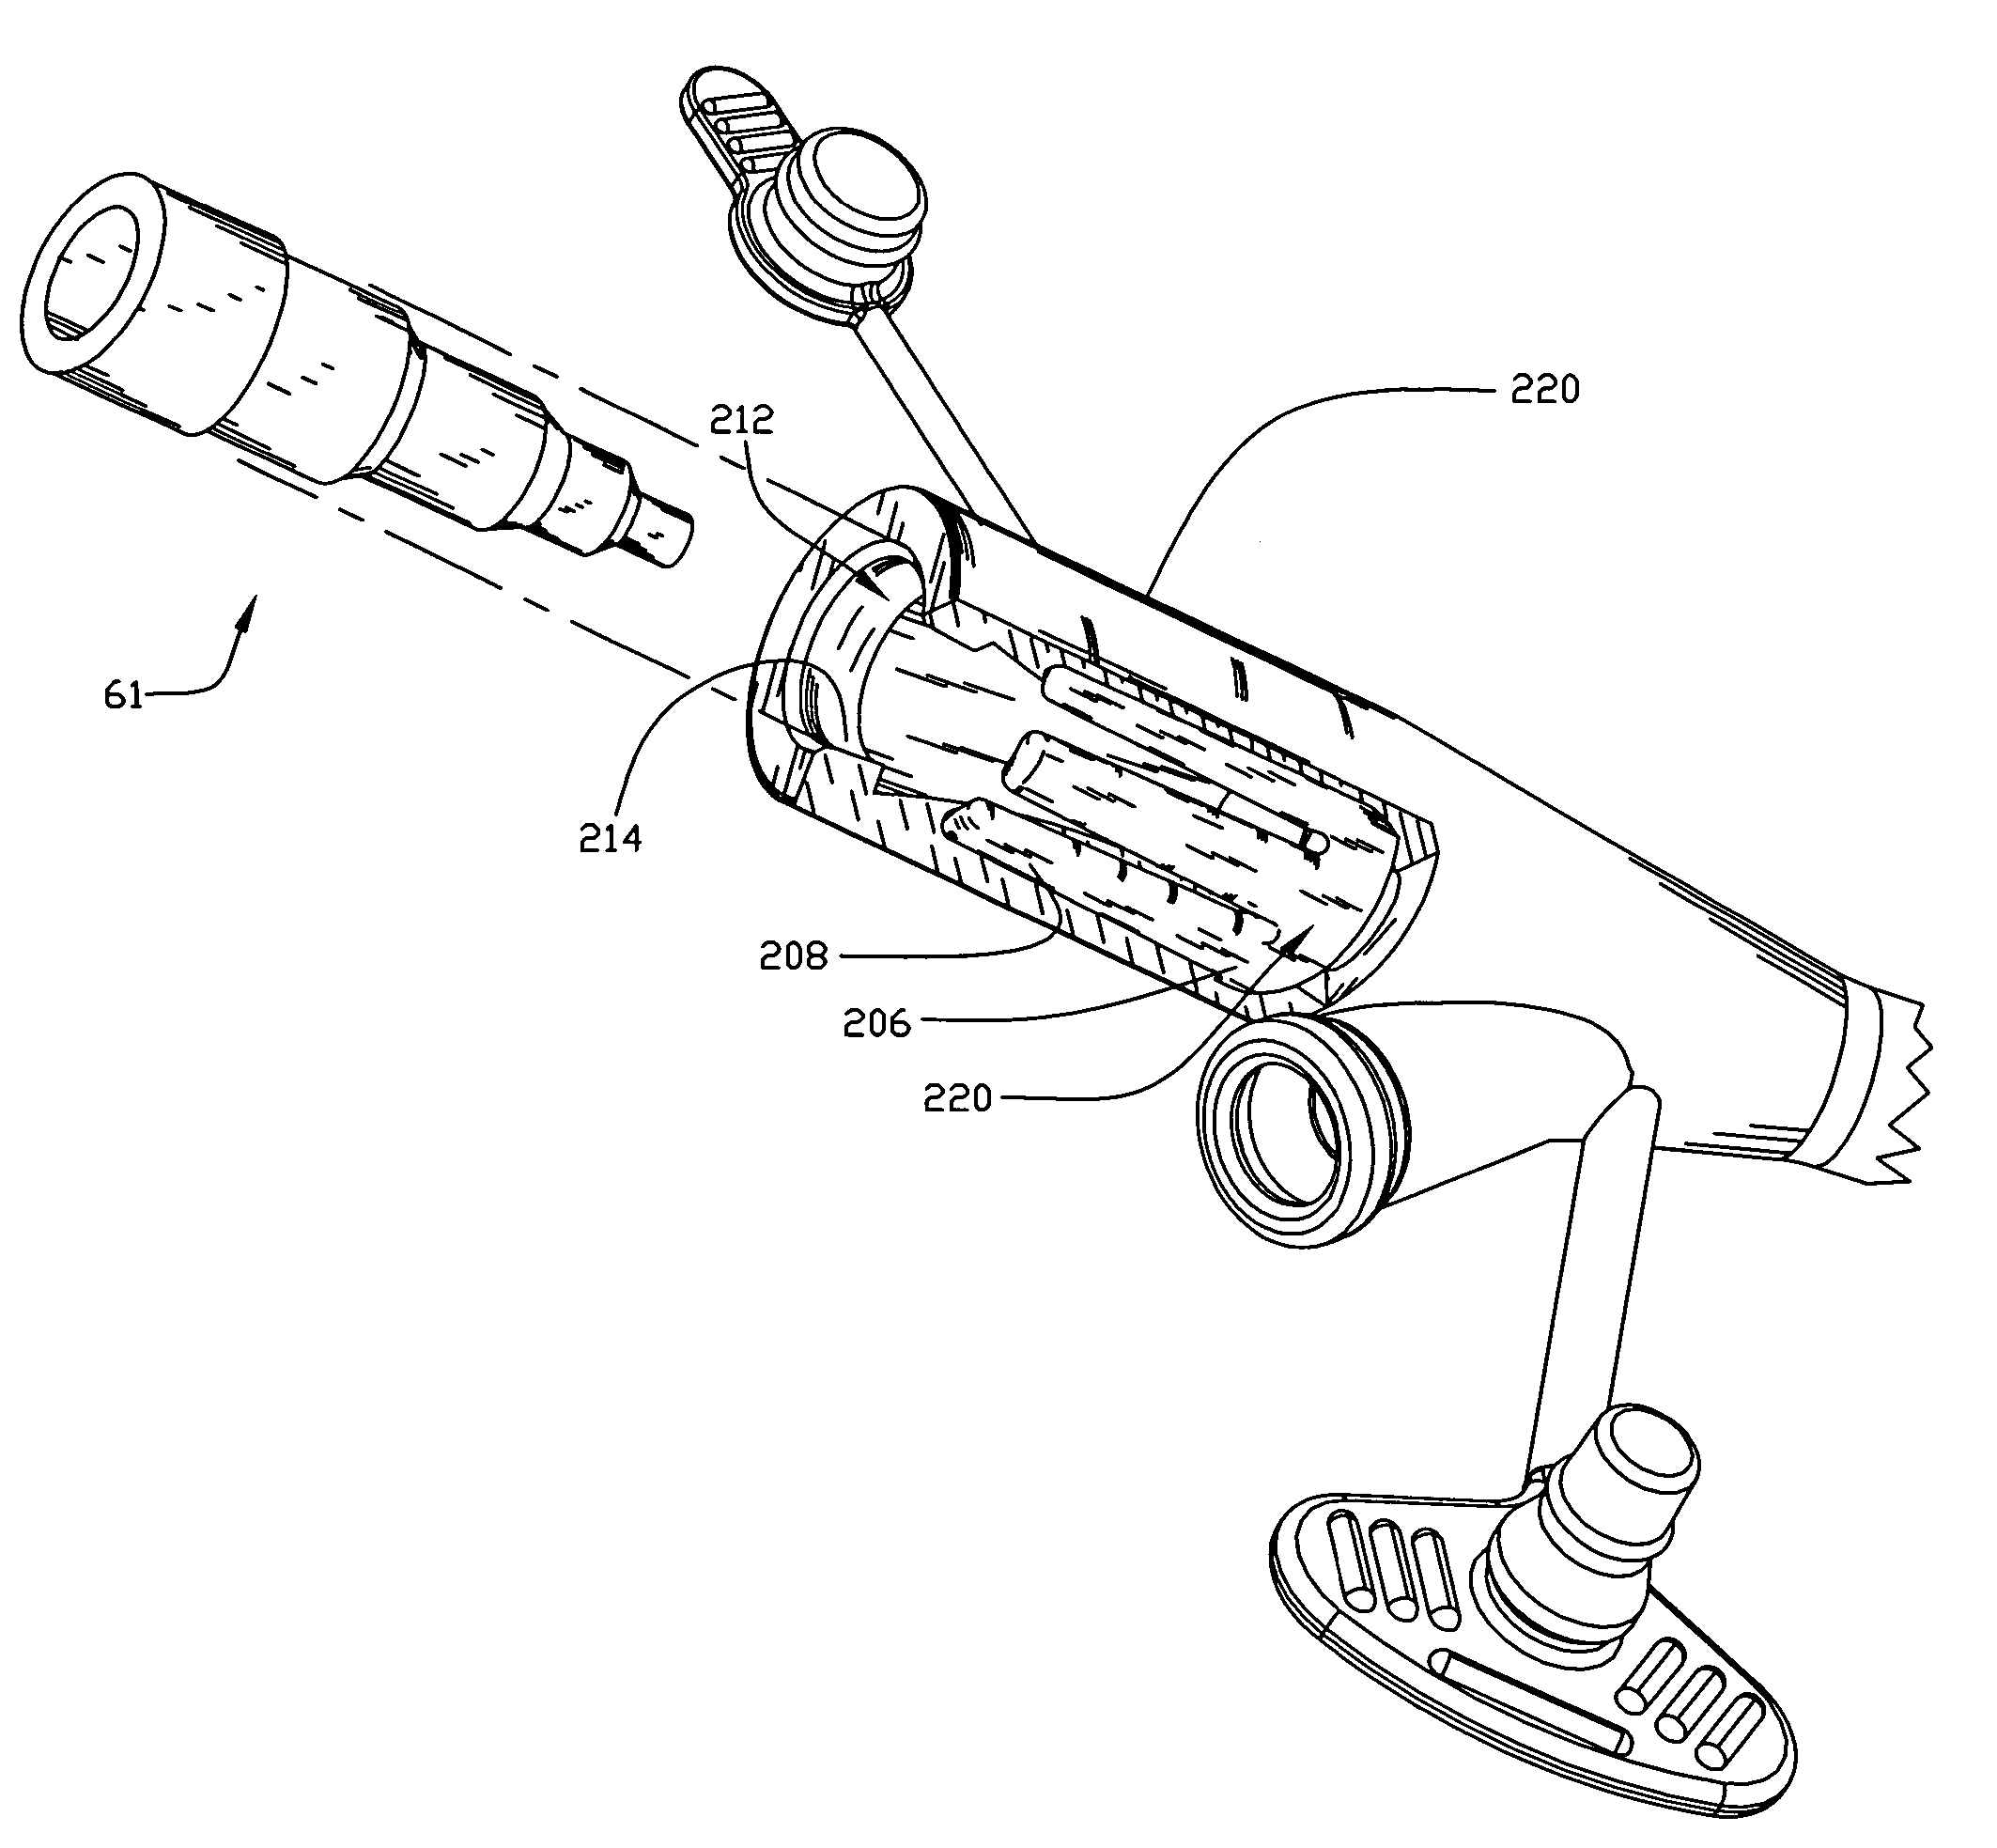 Retention device for medical components